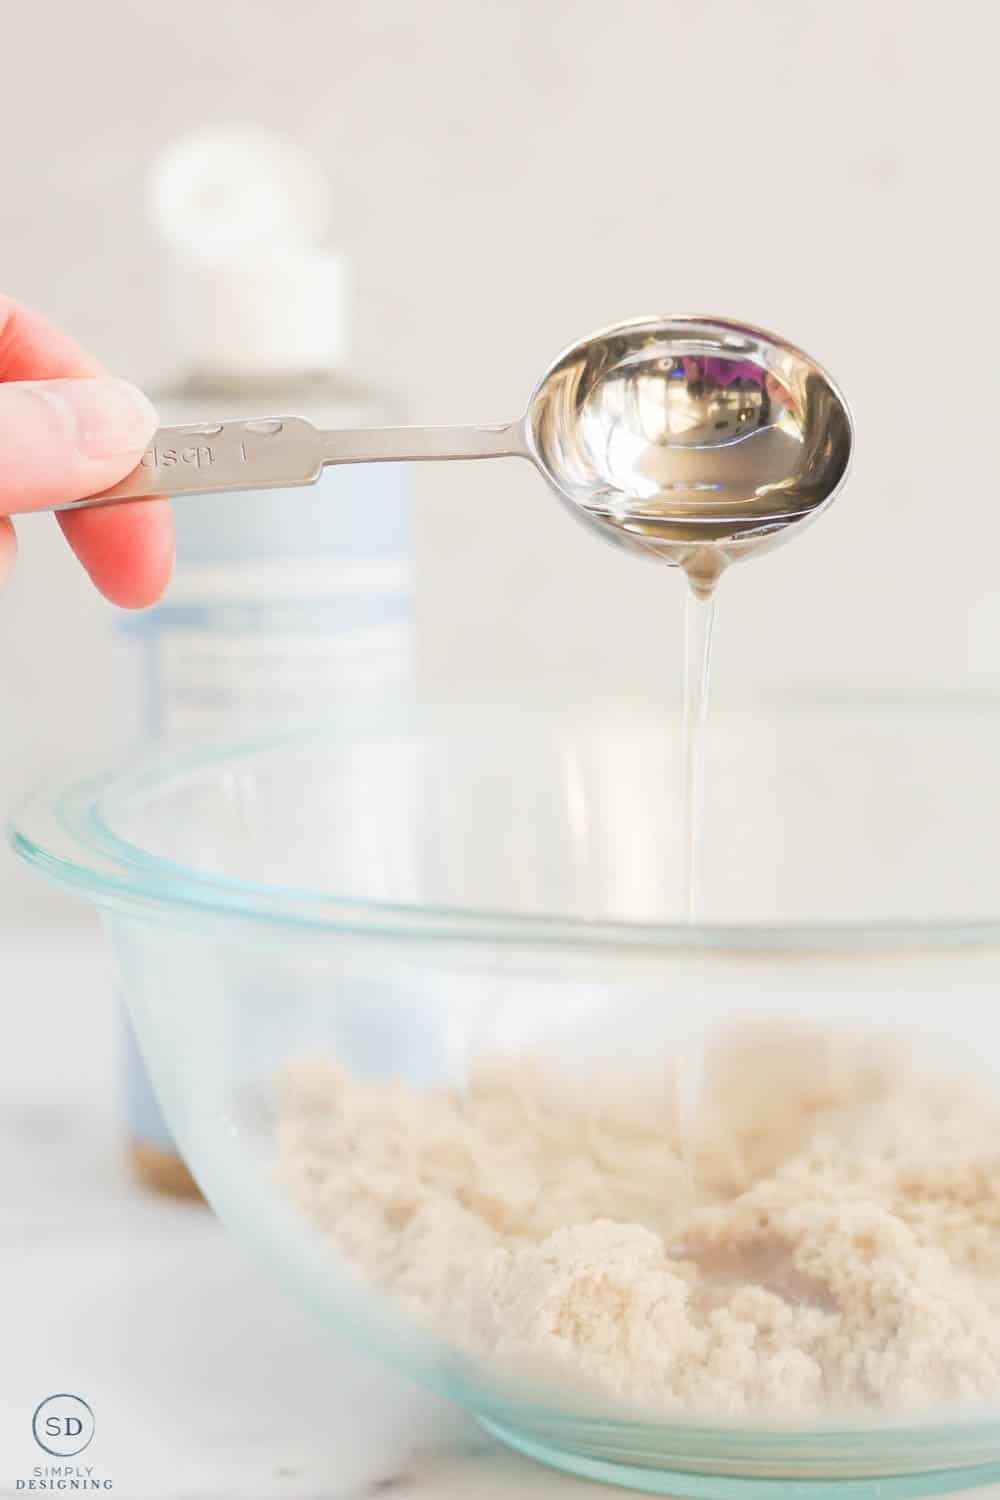 pouring castile soap into bowl with measuring spoon